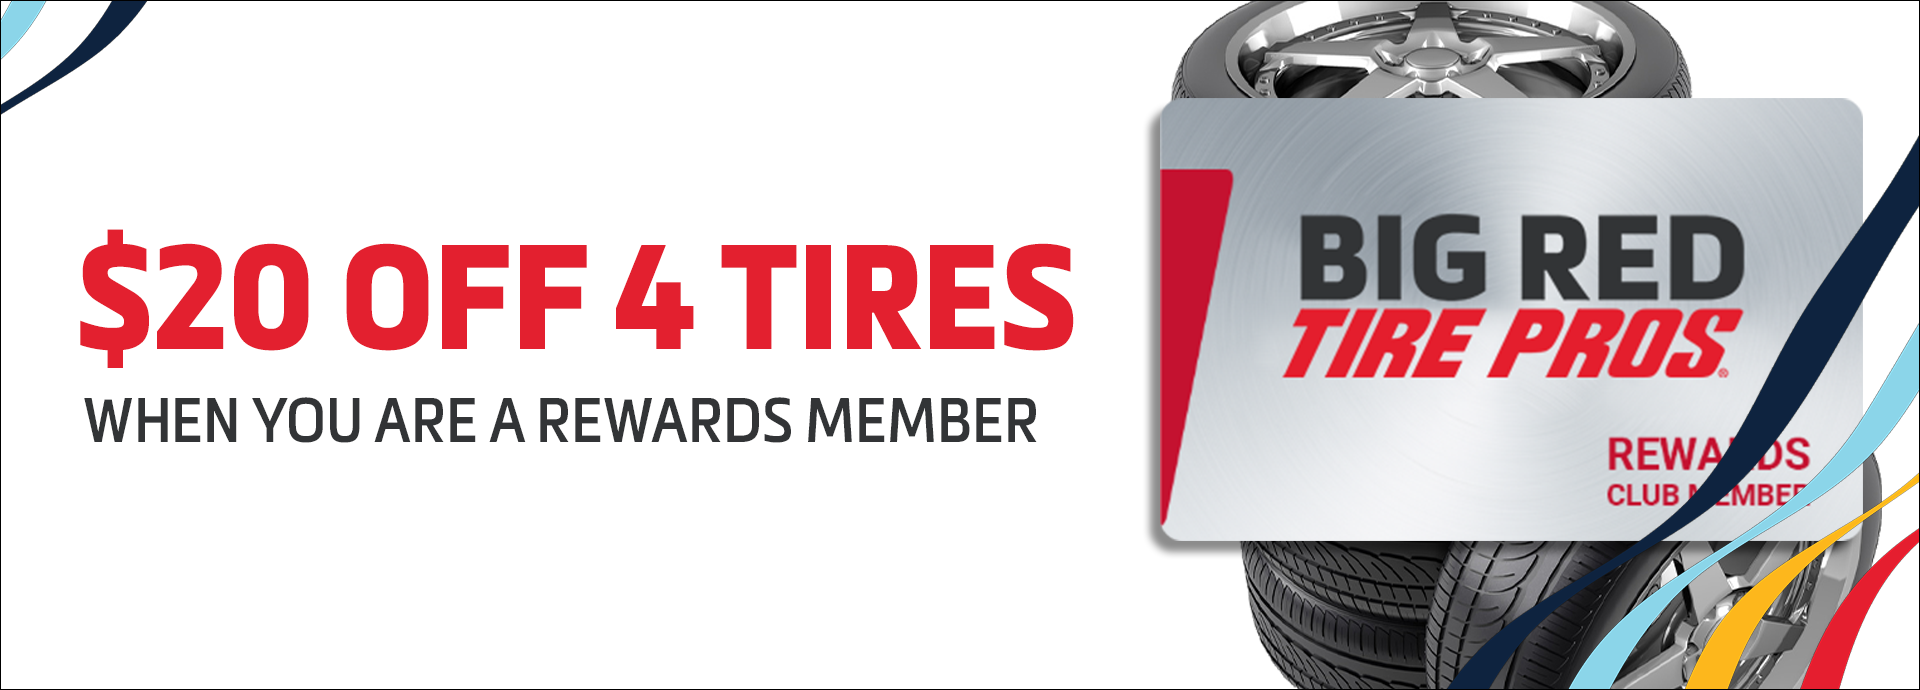 $20 Off 4 Tires